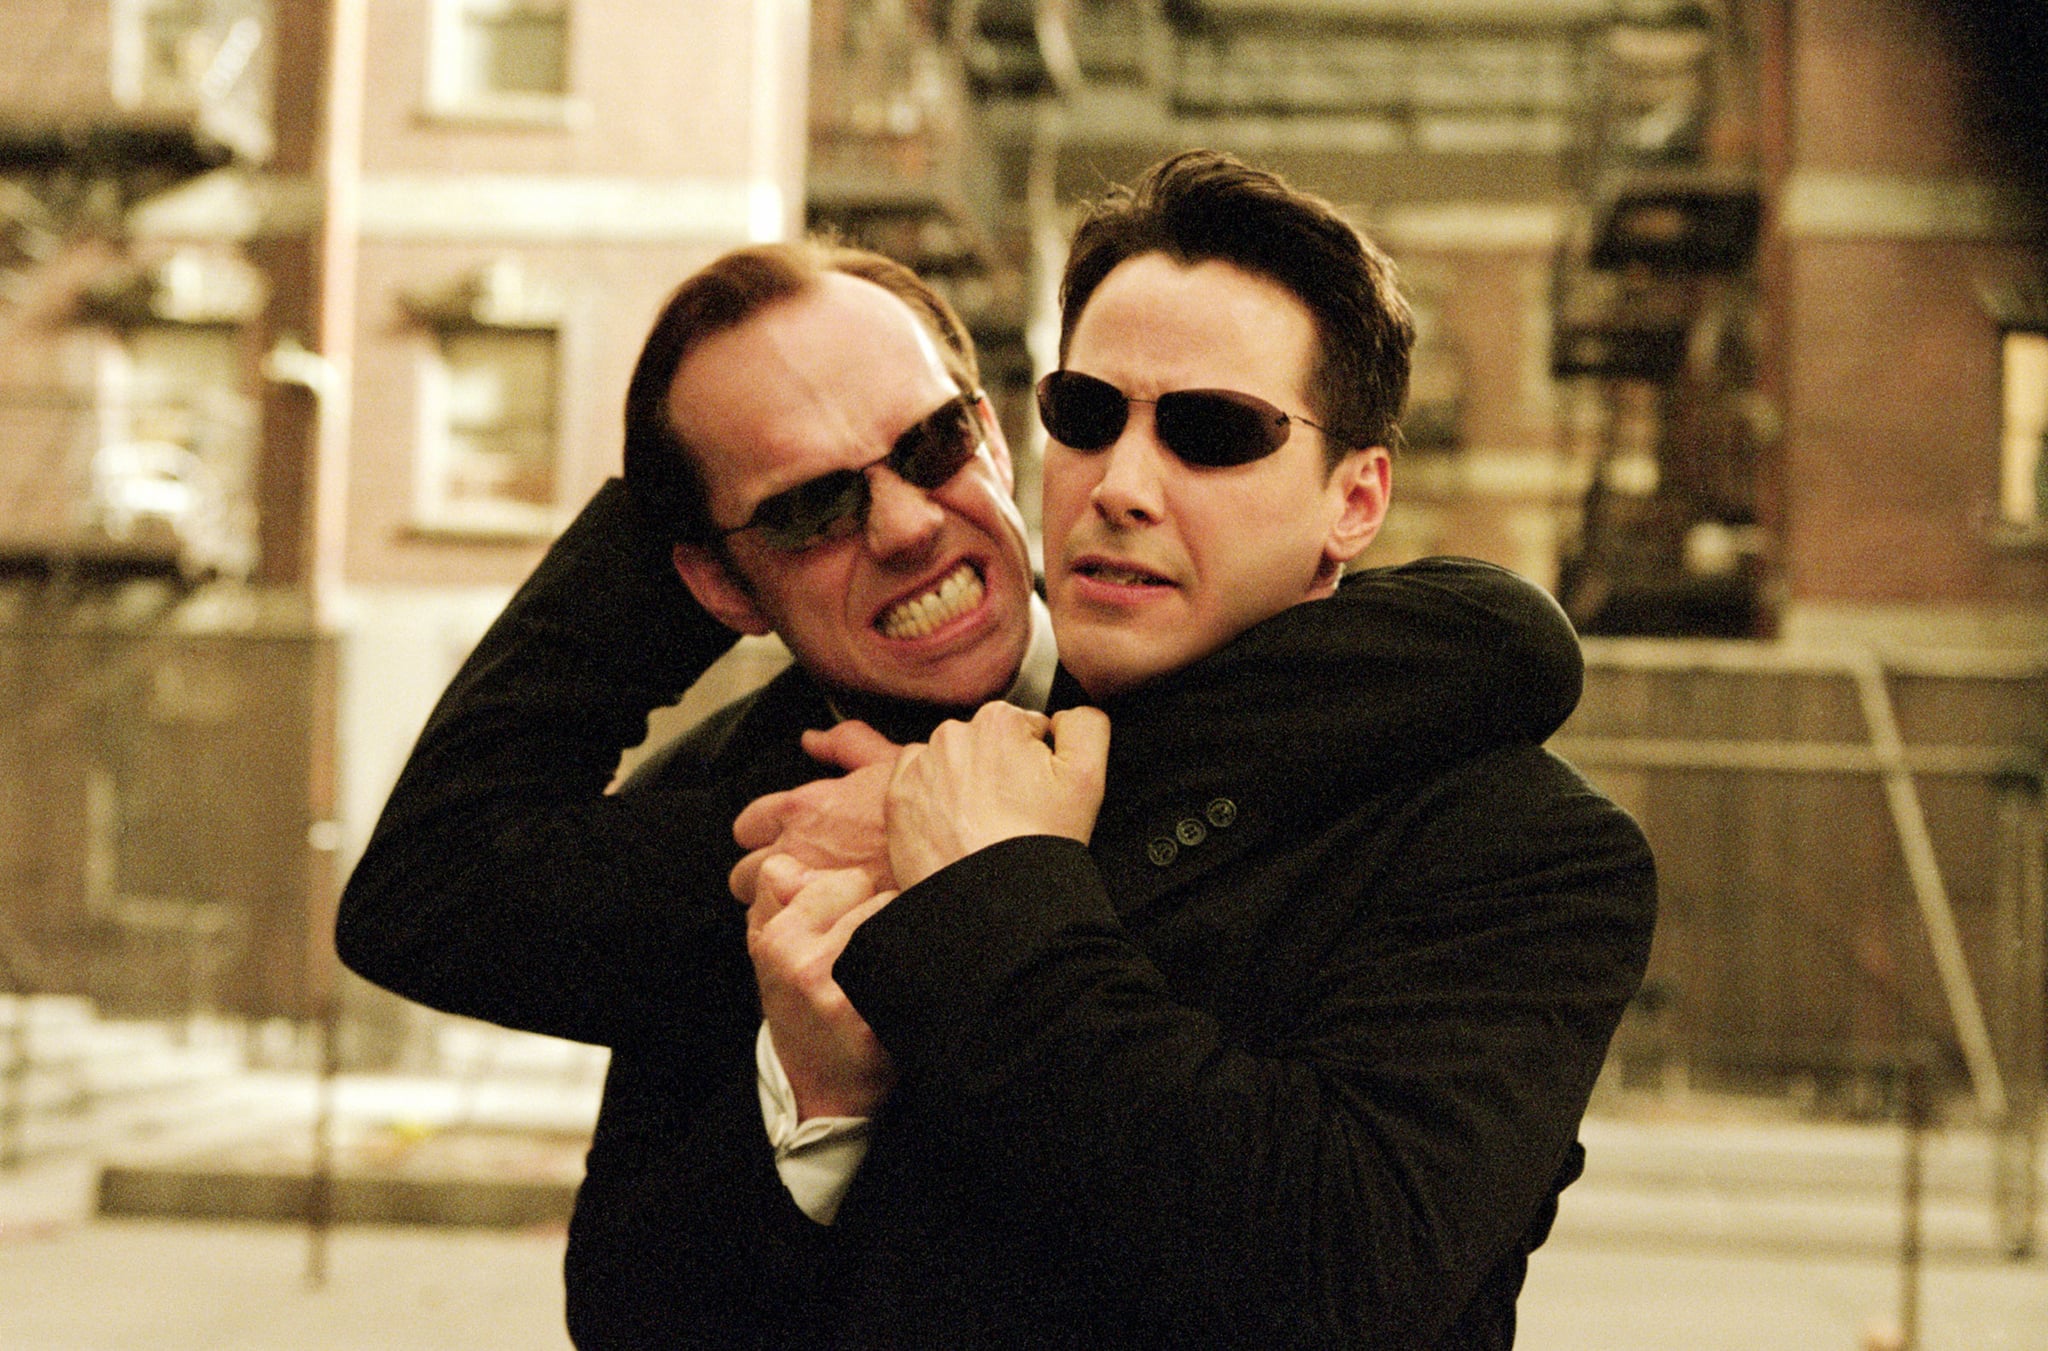 THE MATRIX RELOADED, Hugo Weaving, Keanu Reeves, 2003, (c) Warner Brothers/courtesy Everett Collection